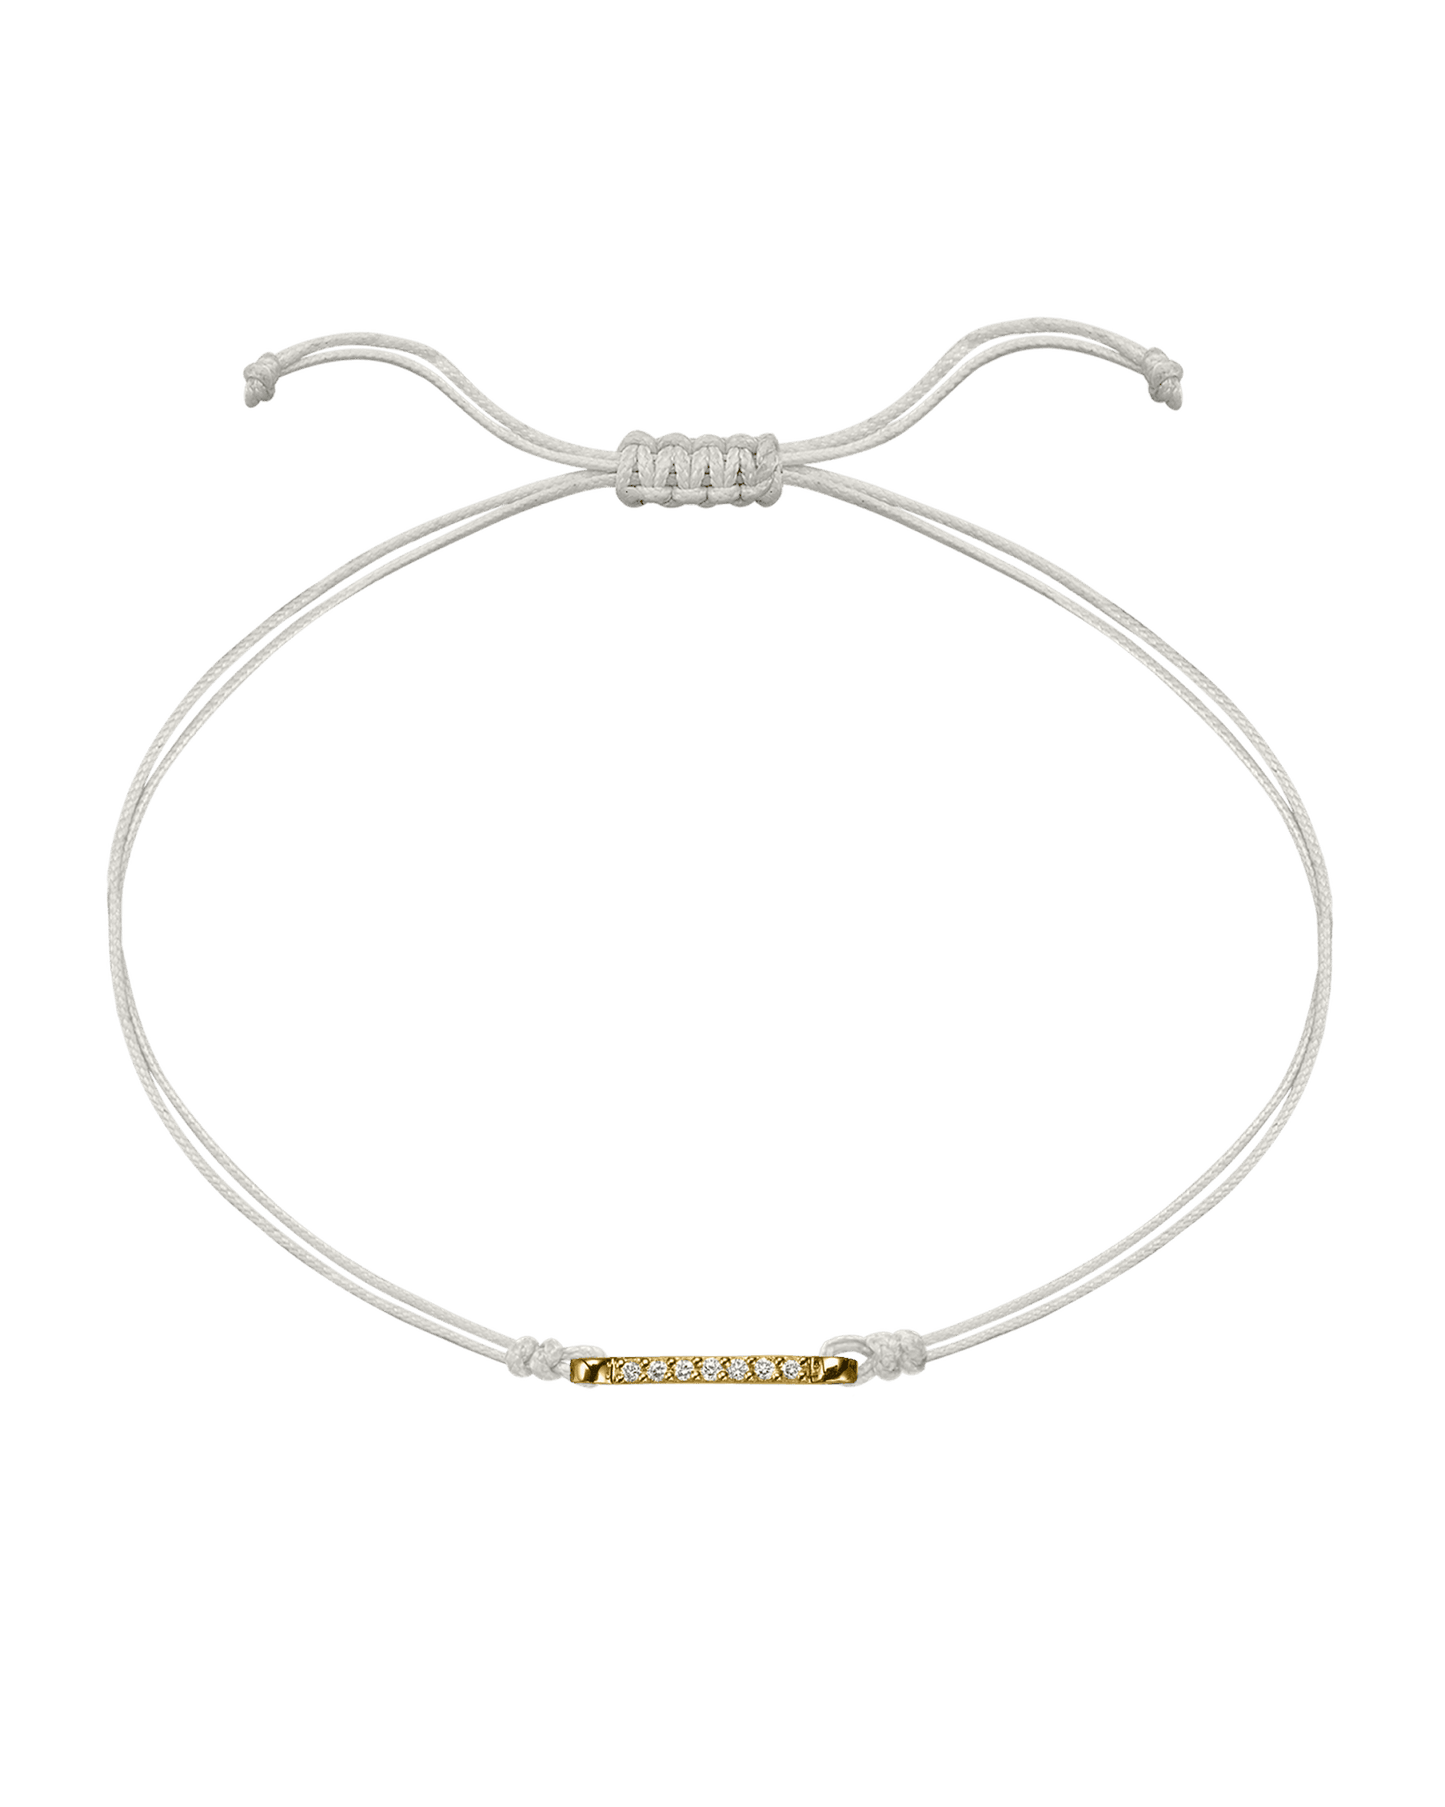 The Diamond Bar String Of Love - 14K Yellow Gold Bracelet 14K Solid Gold Pearl 